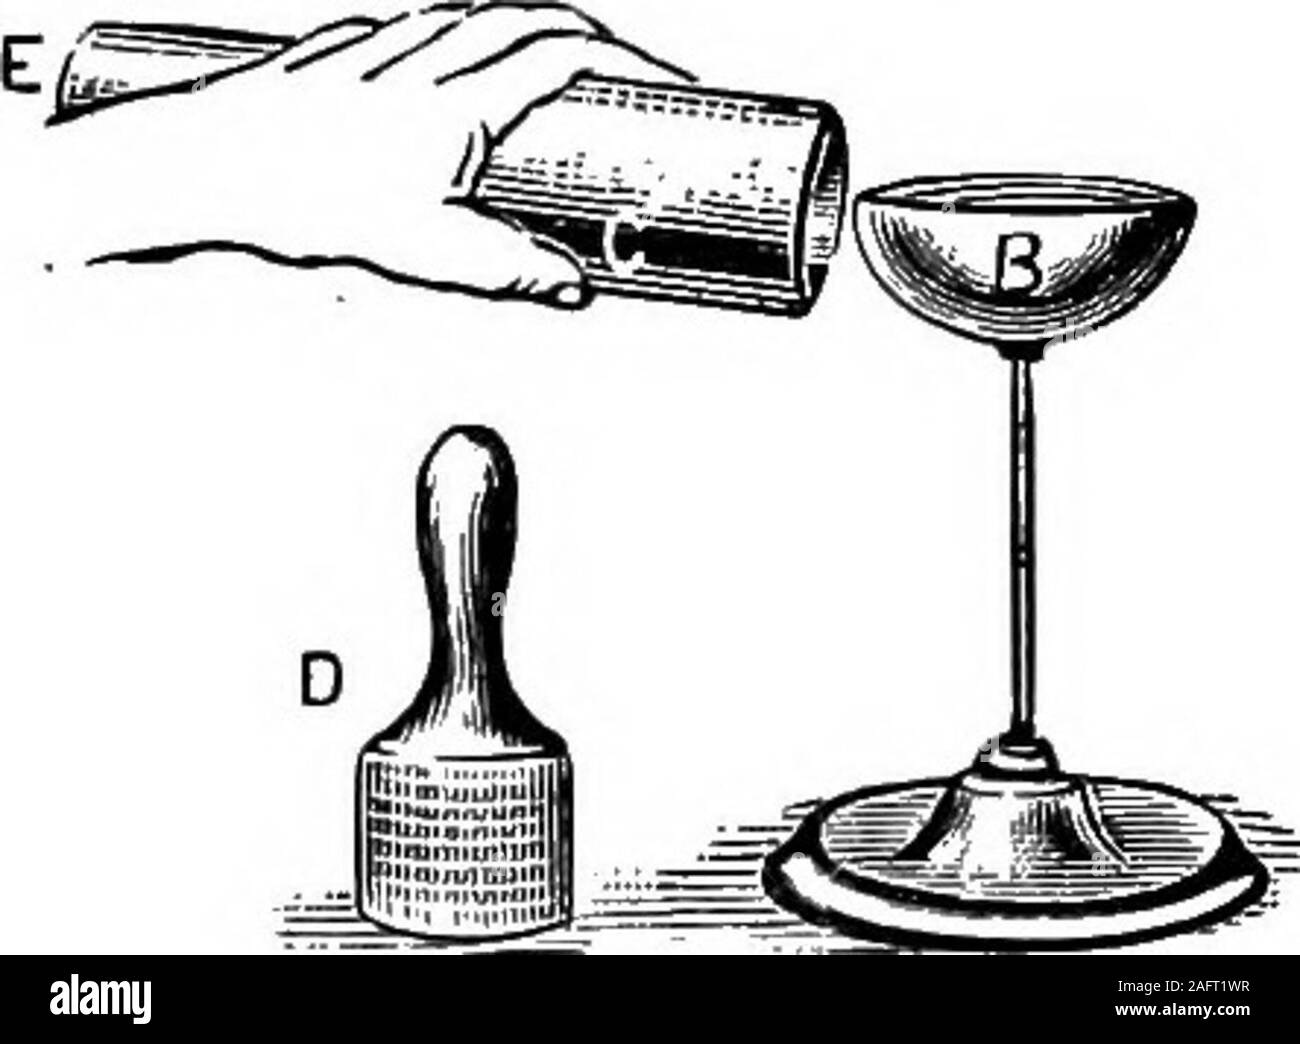 . The principles of physics. (always an even number), vibrating parts. Experiment 6.—Remove the brass plate (Fig. 191) from its support, and fasten the bell B (Fig. 194) on the support. Bow the edge of the bell at some point, and hold the open tube C in a horizontal position with the center of one of its openings near that point of the edge of the bell which is opposite the point bowed. The tube loudly reenforces the sound of the bell. Move the tube around the edge of the bell and find its nodes. Thrust the plunger D into the open end E of the tube, and find what part of the length of an open Stock Photo